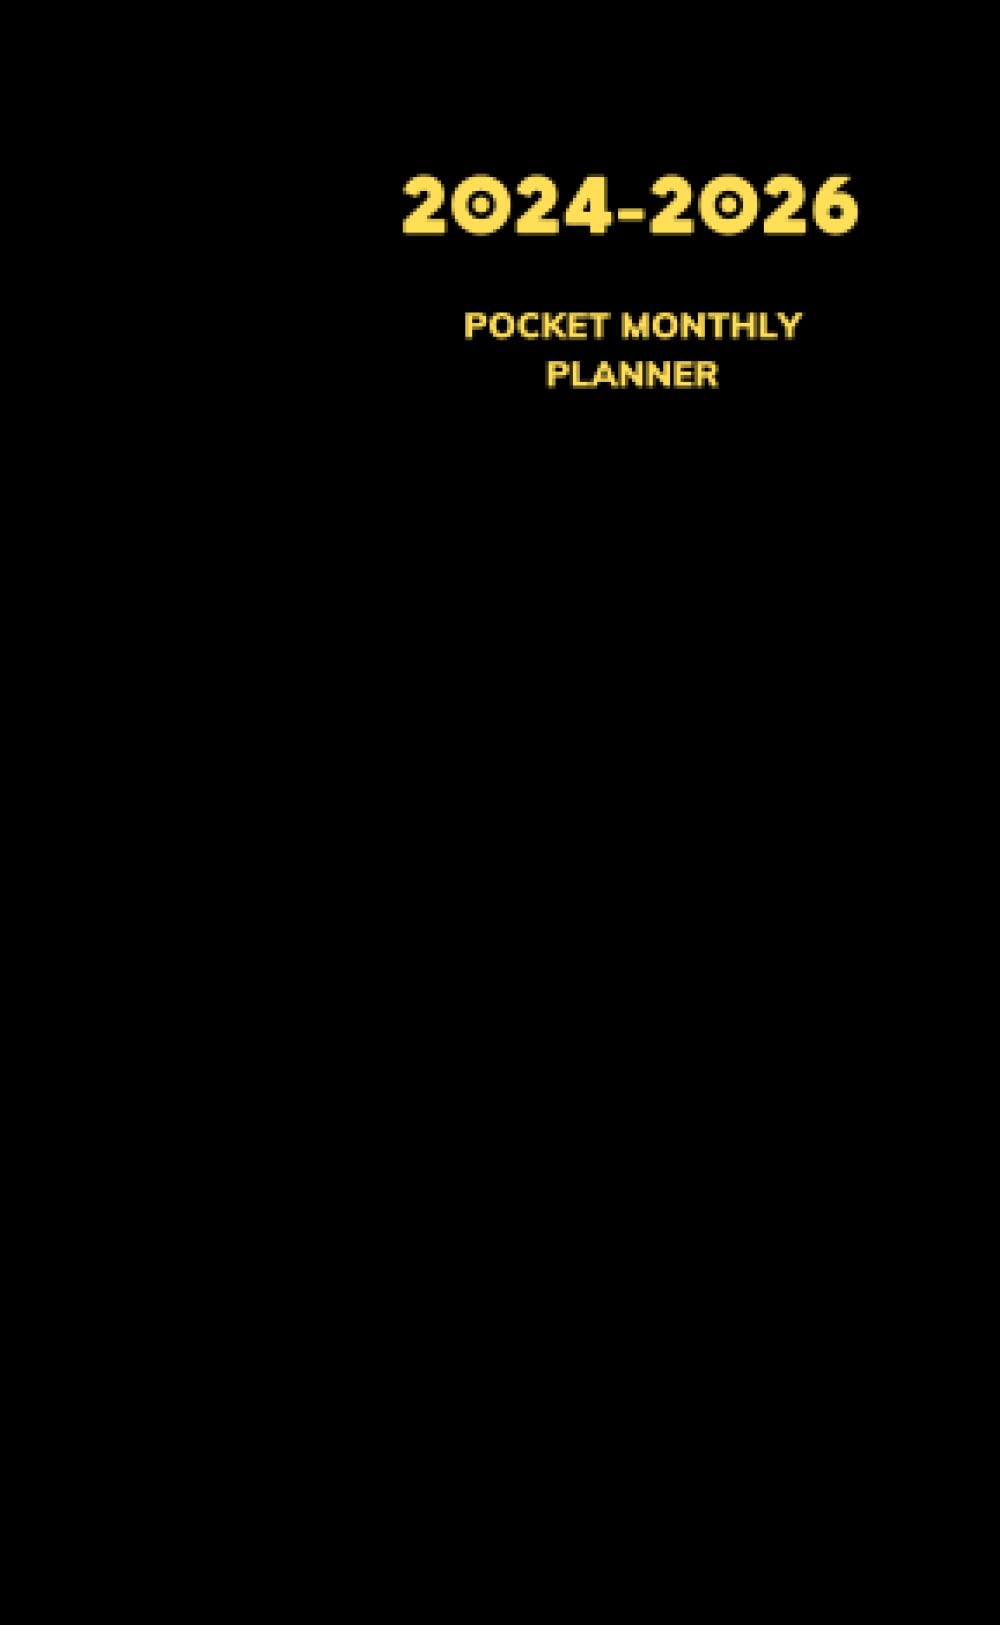 2024-2026 Monthly Planner Pocket: 3 Years Calendar from Jan 2024- Dec 2026 for Purse